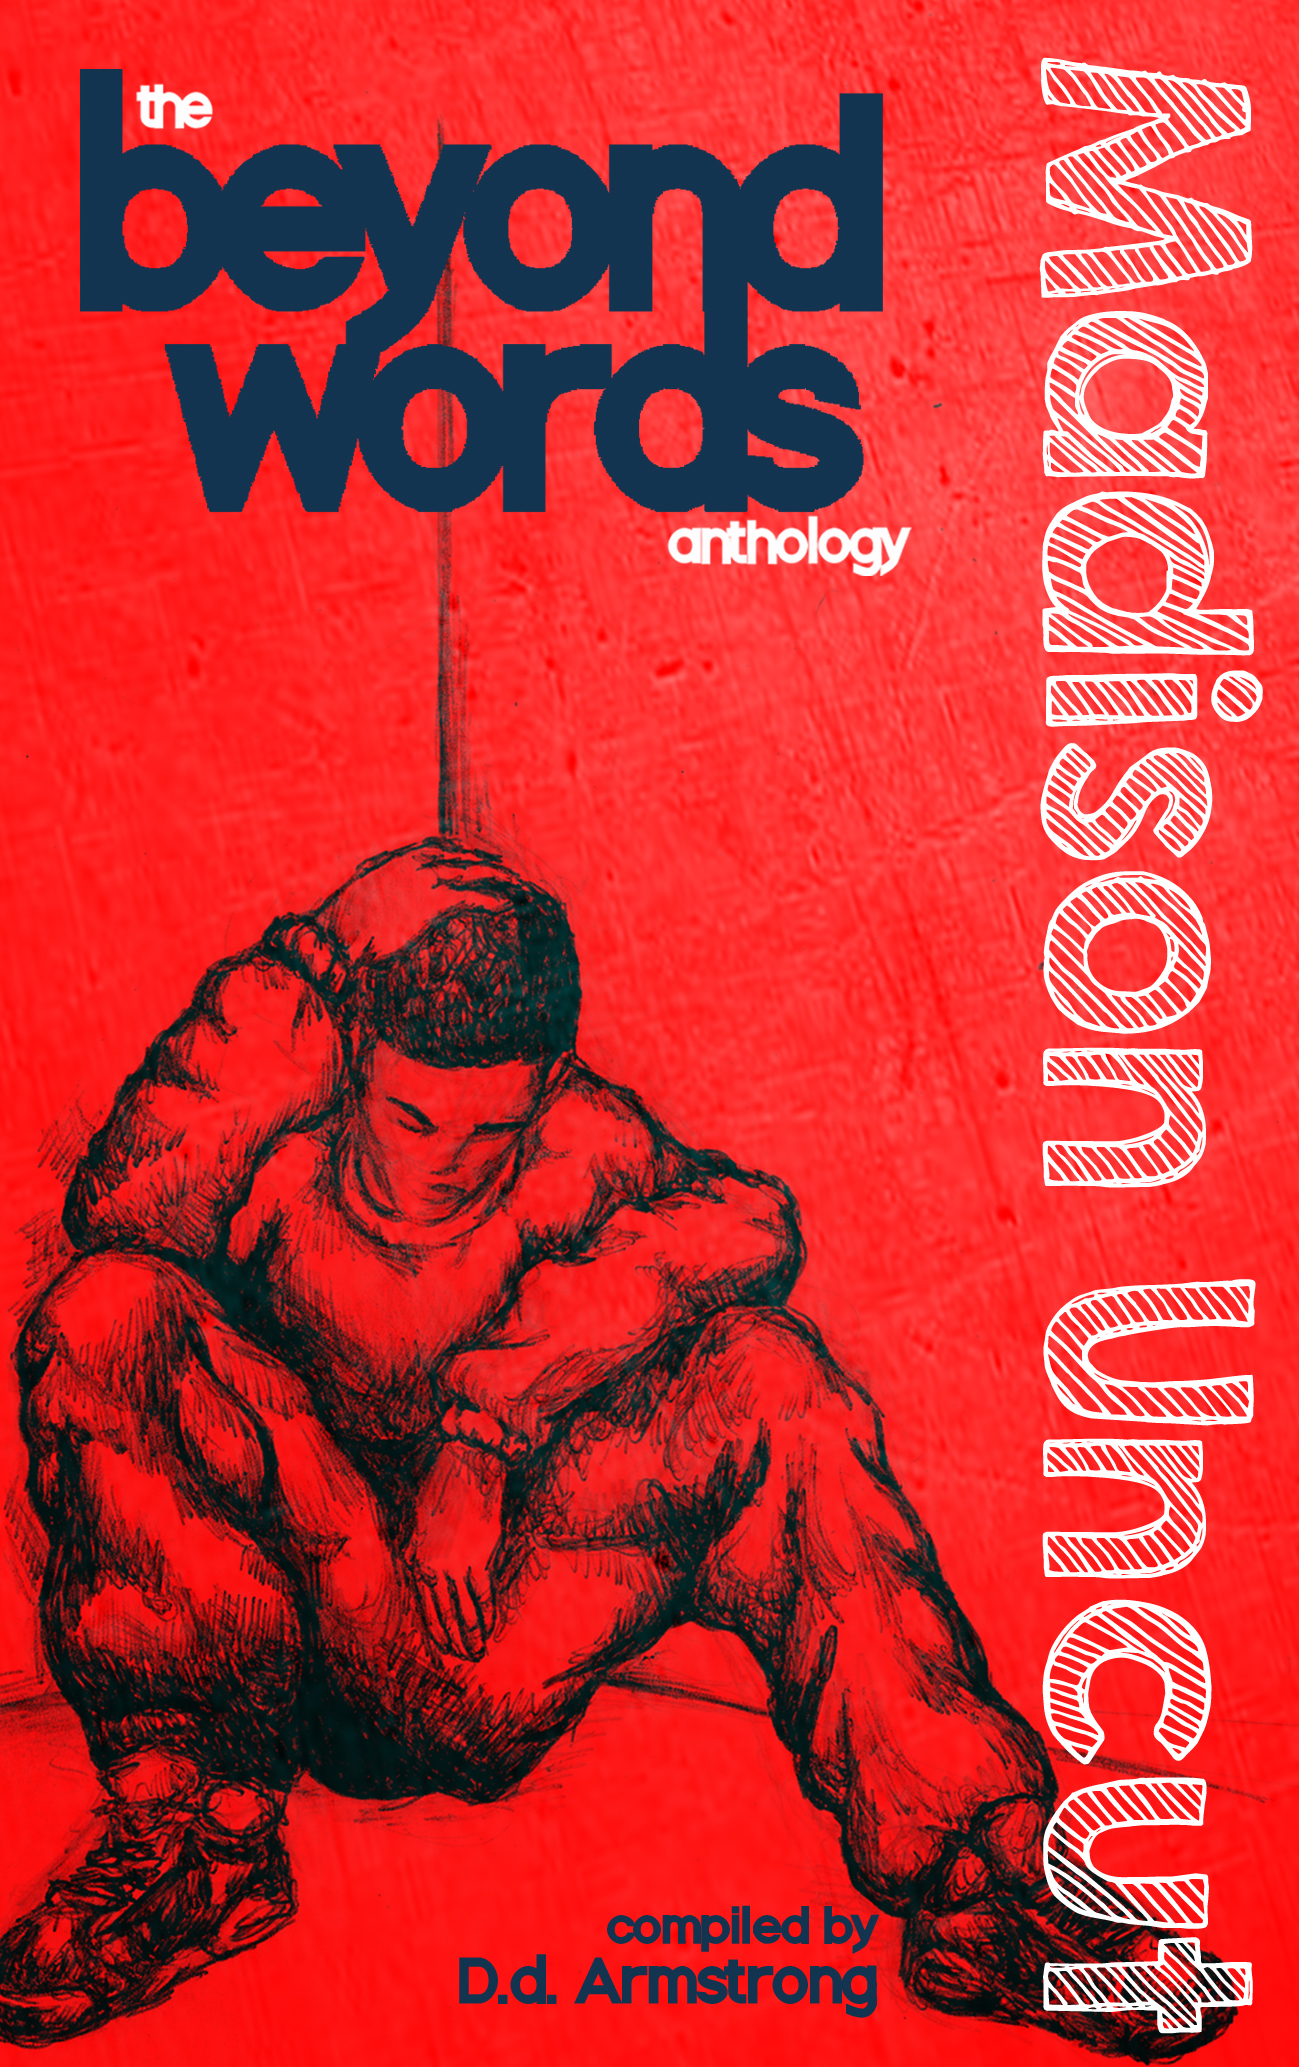 2020 Word for Word Anthology by cusoa - Issuu